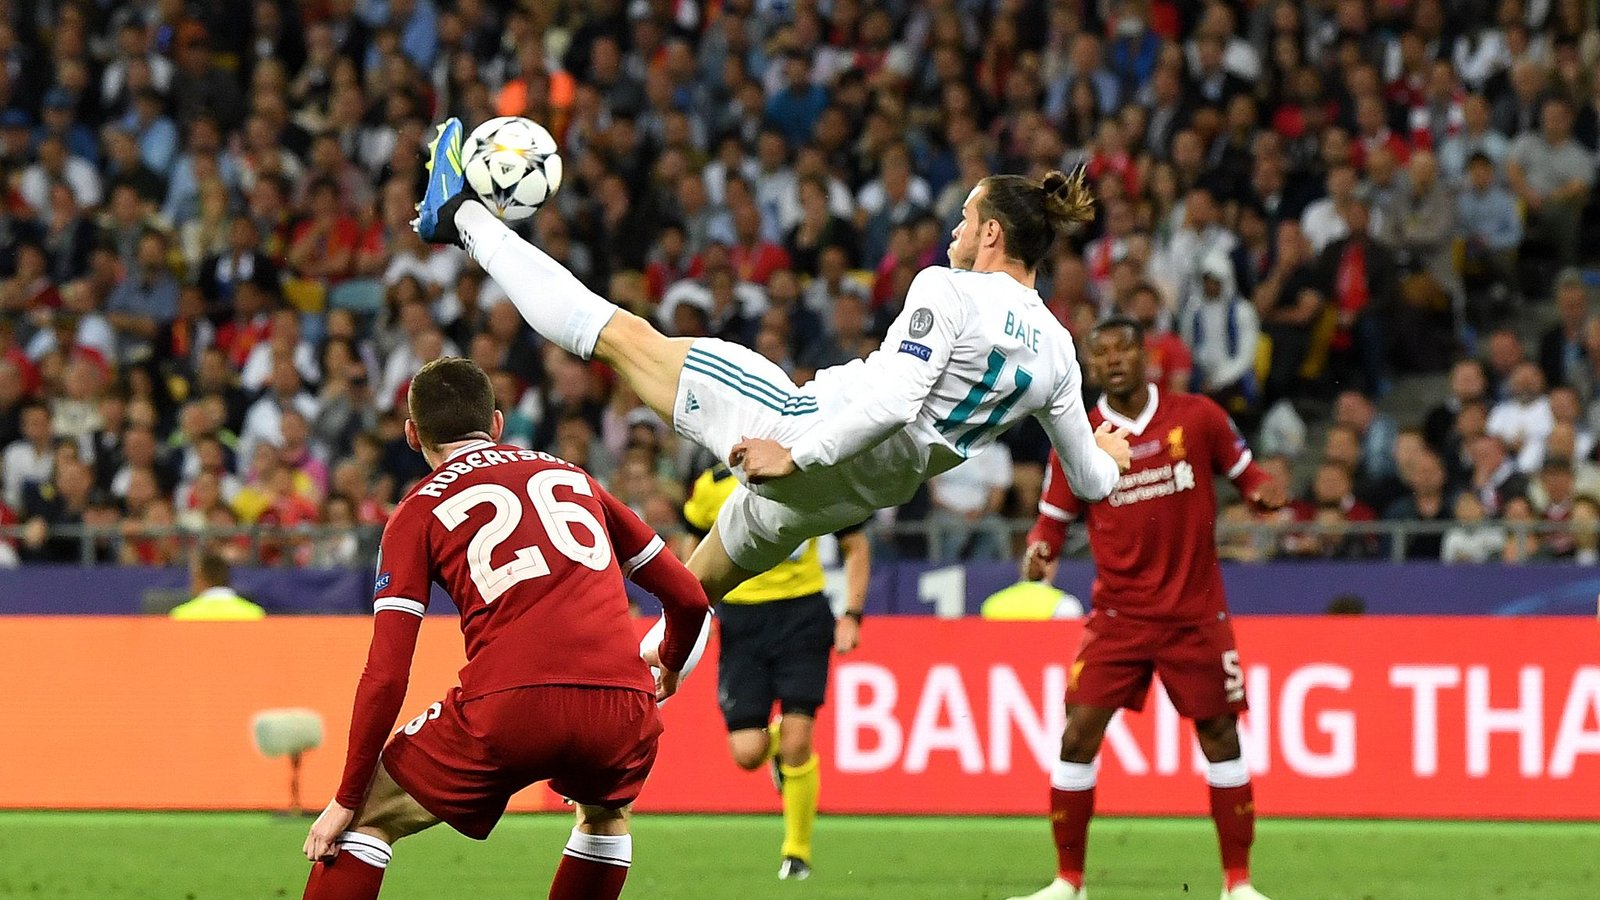 Gareth Bale scores a legendary bicycle kick against Liverpool in the Champions League final